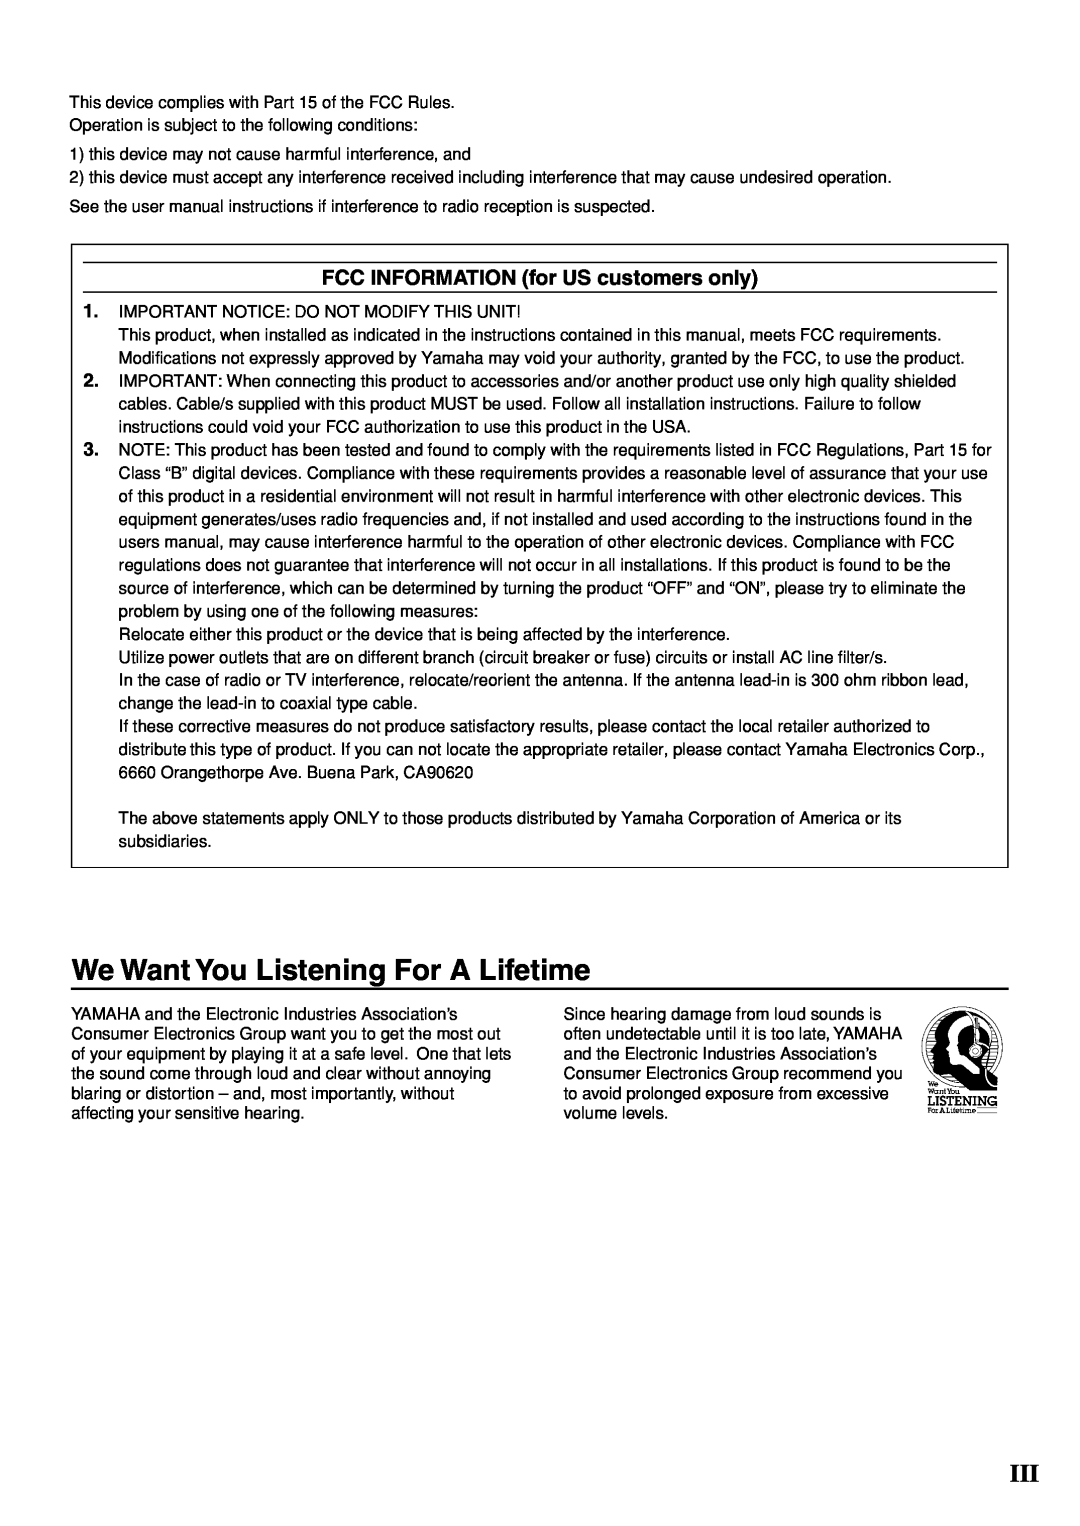 Yamaha YST-SW005 owner manual FCC INFORMATION for US customers only, We Want You Listening For A Lifetime 